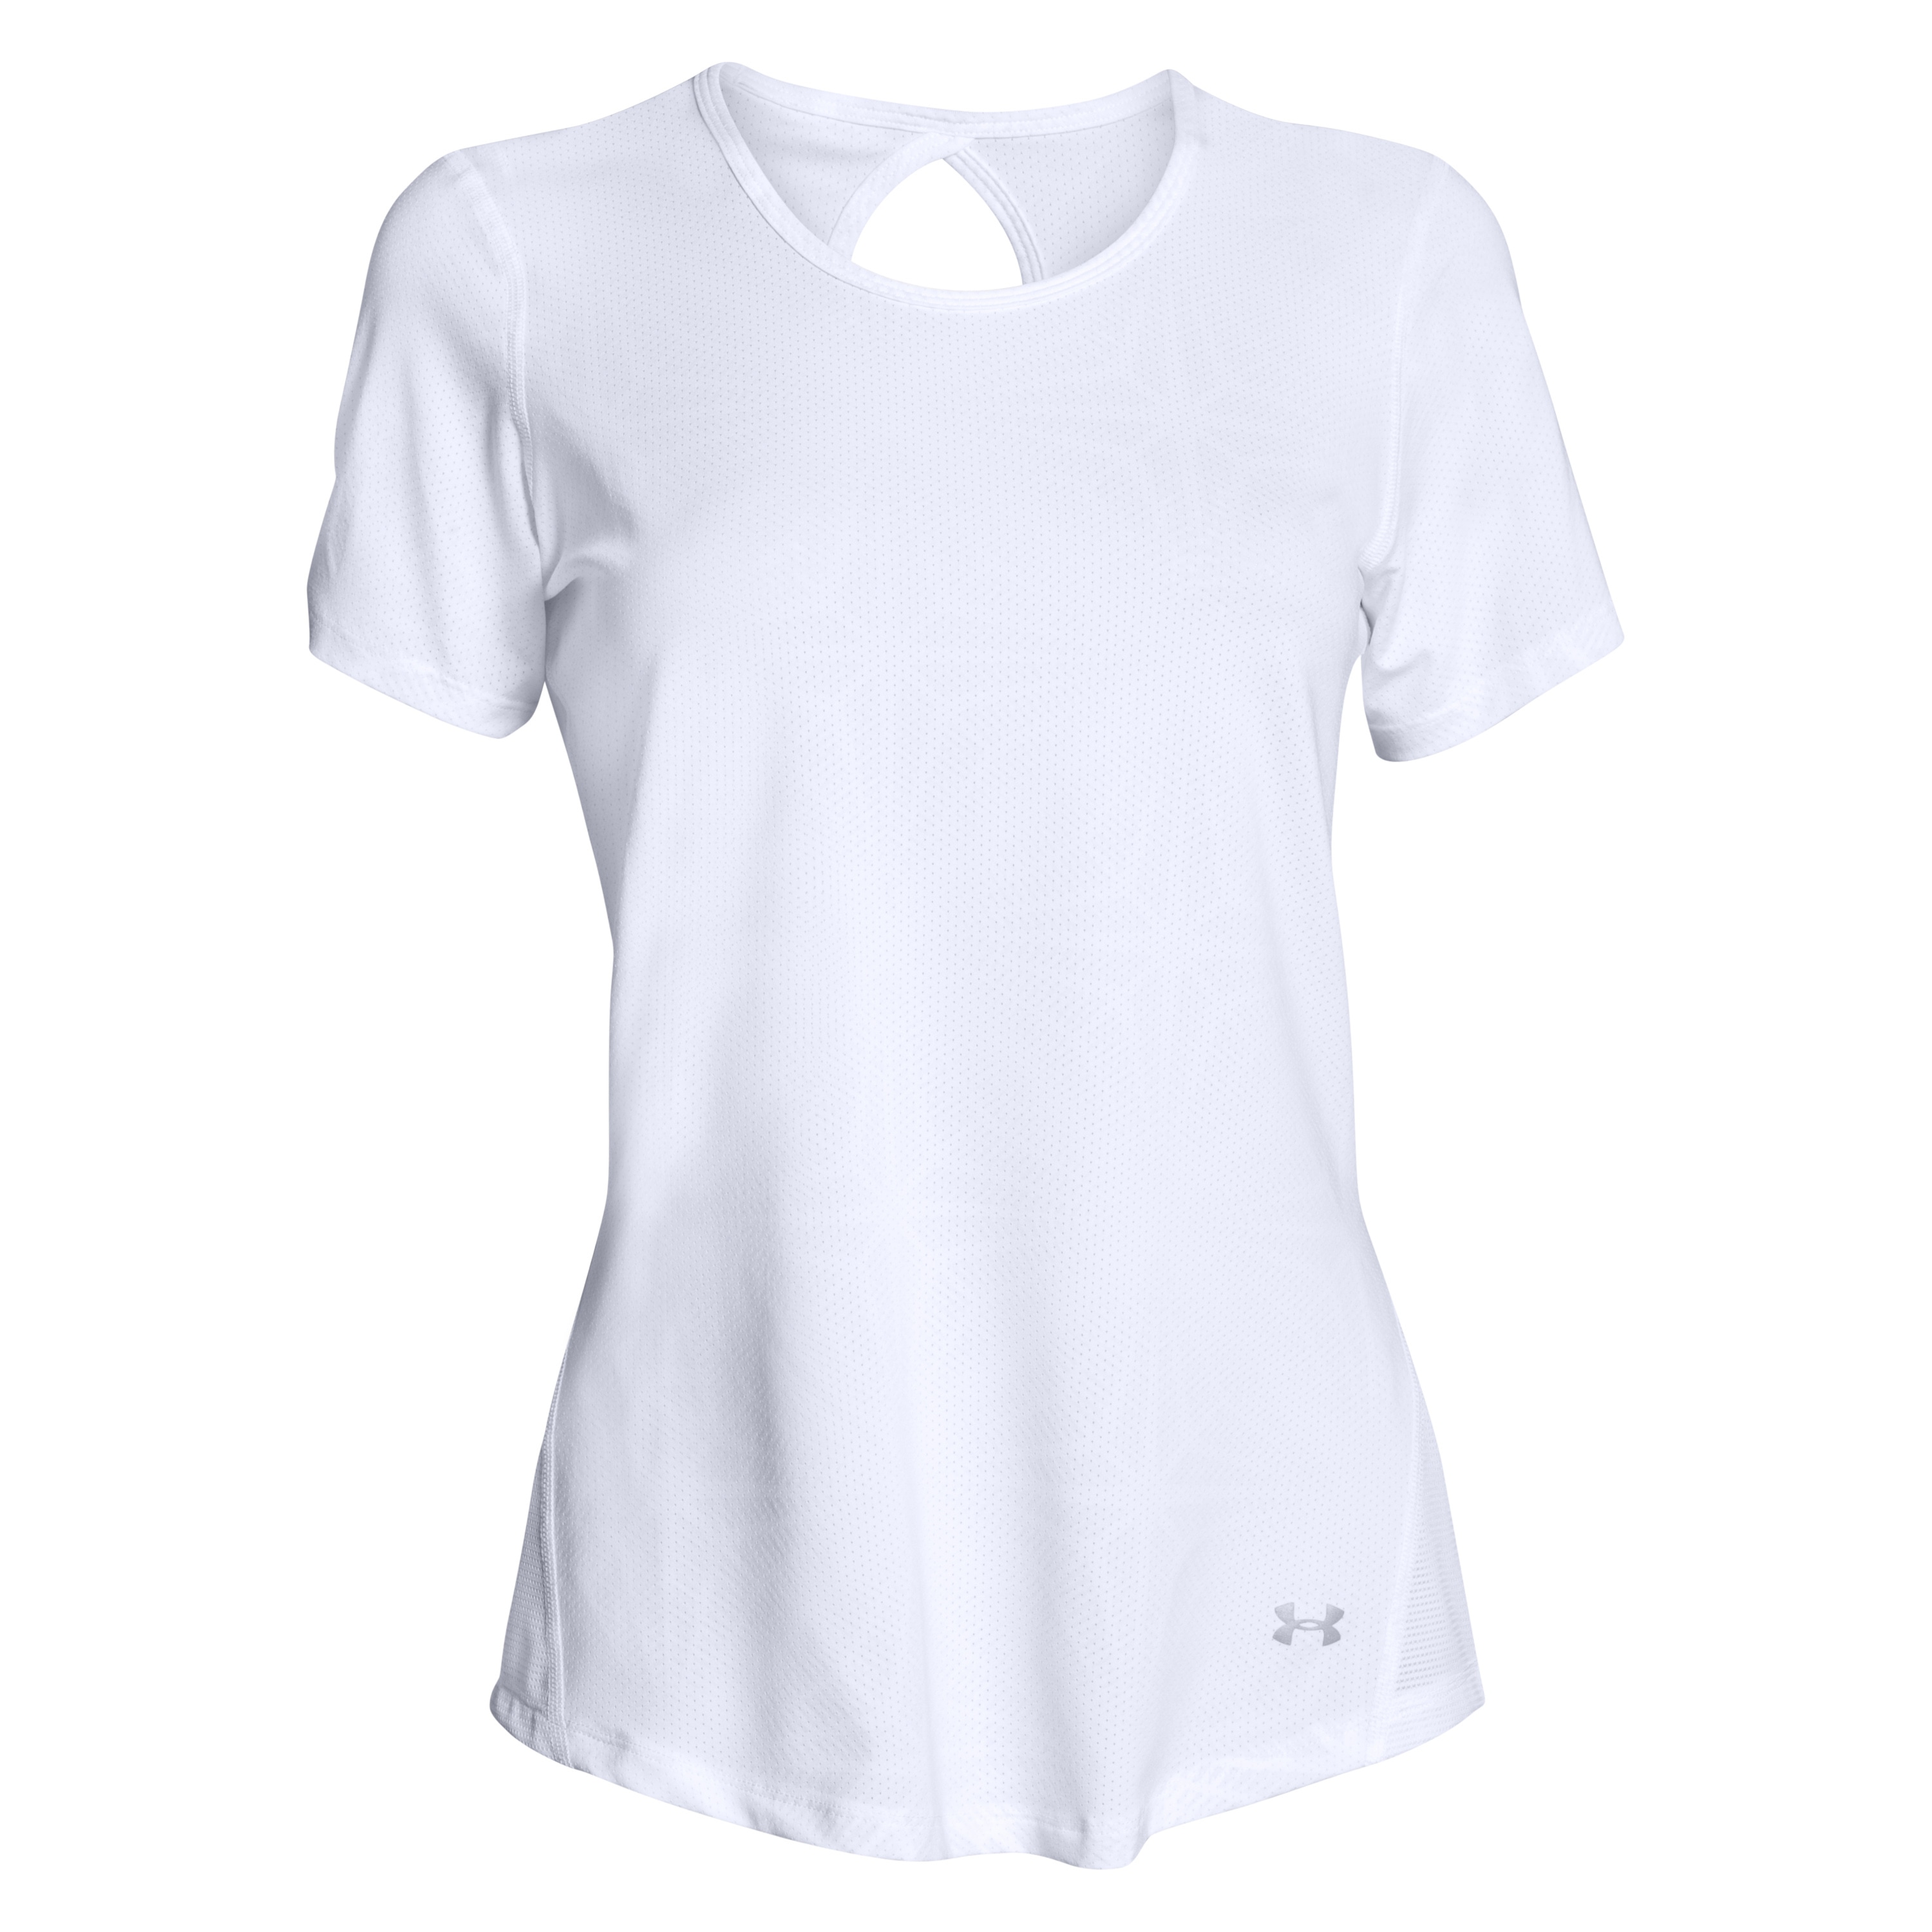 Purchase the Under Armour Women T-Shirt HeatGear CoolSwitch whit